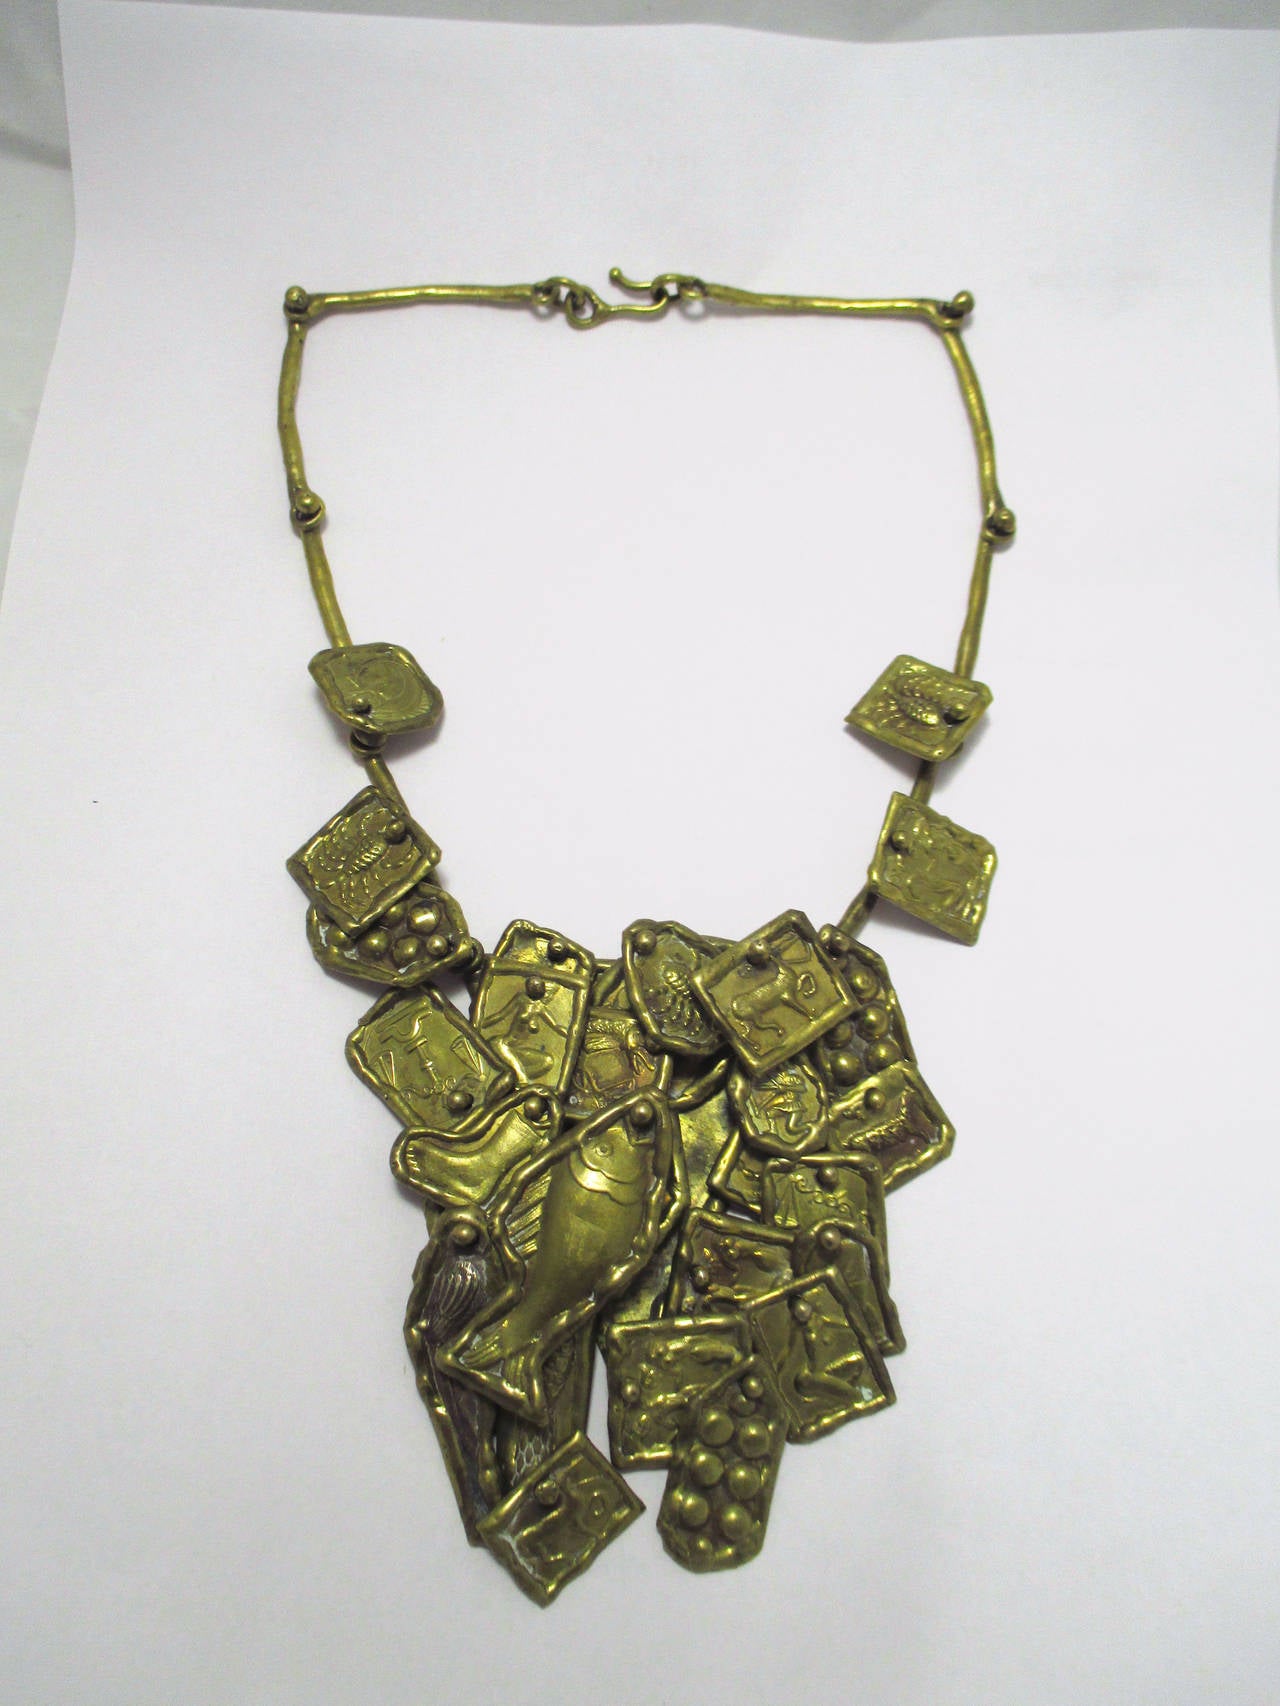 A Pal Kepenyes bronze necklace signed on the back. With fish and animal motives.